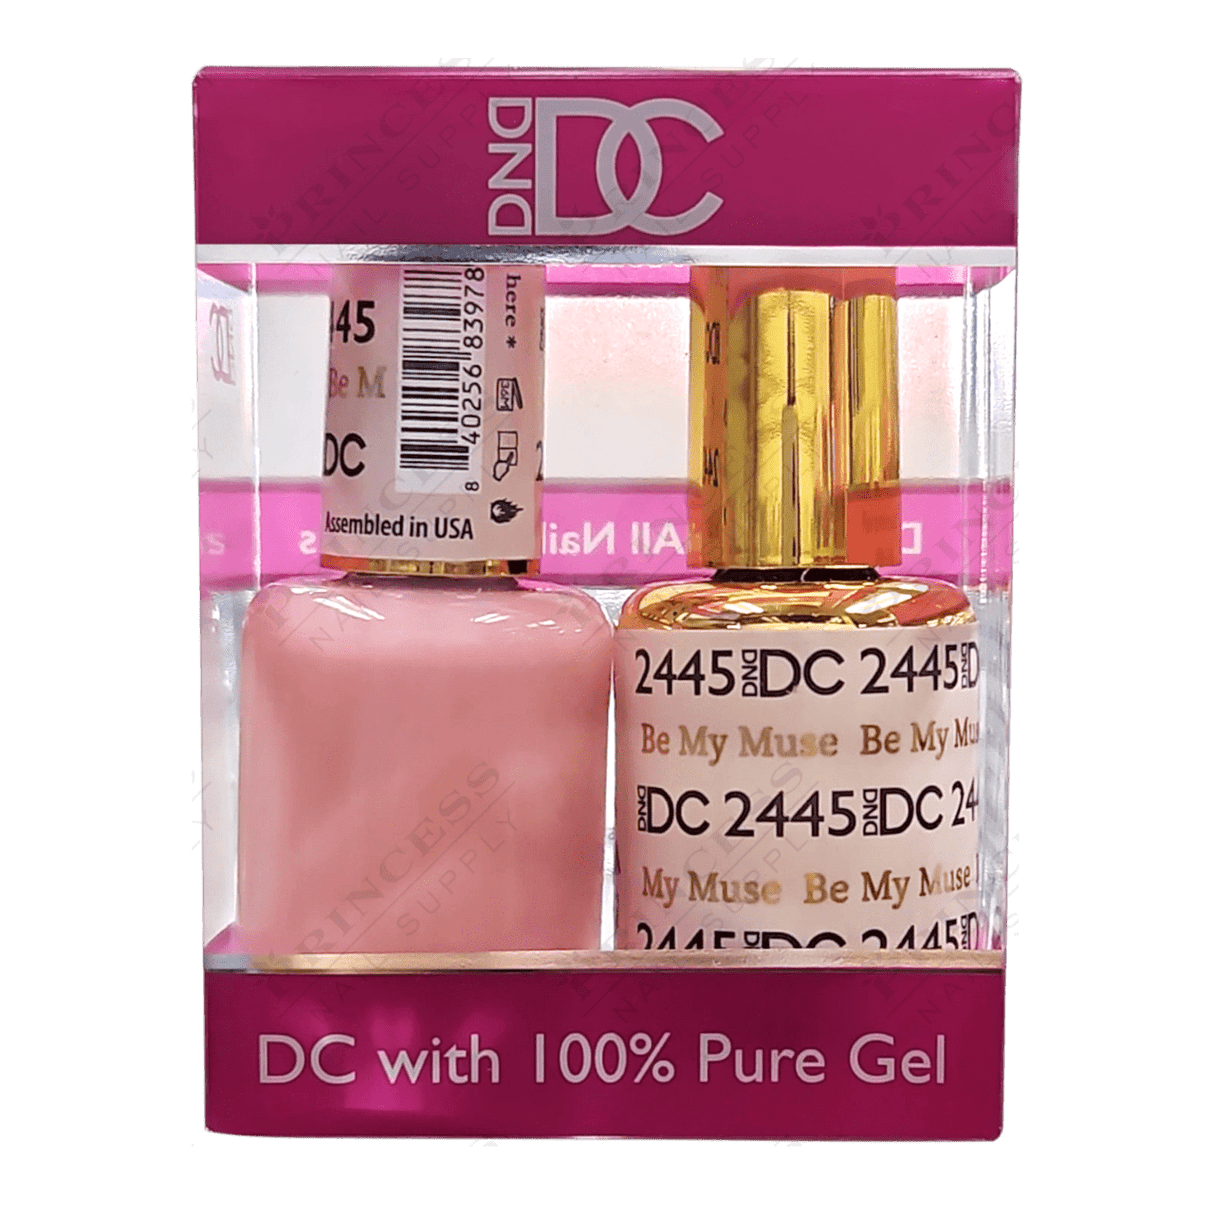 DND DC Duo Gel Matching Color 2445 Be My Muse